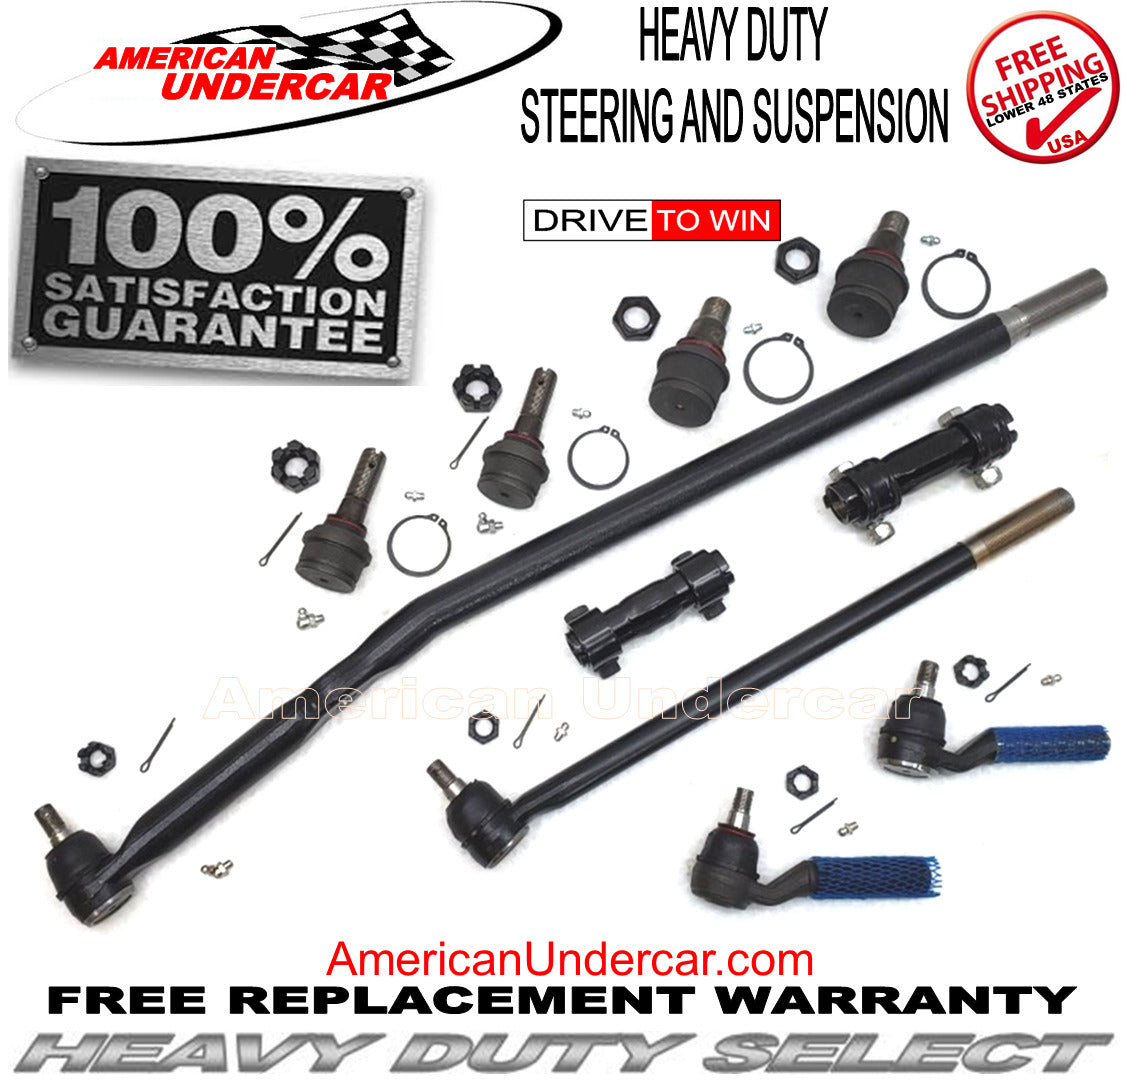 HD Ball Joint Tie Rod Drag Link Sleeve Steering Kit for 1997 Ford F250HD 4x4